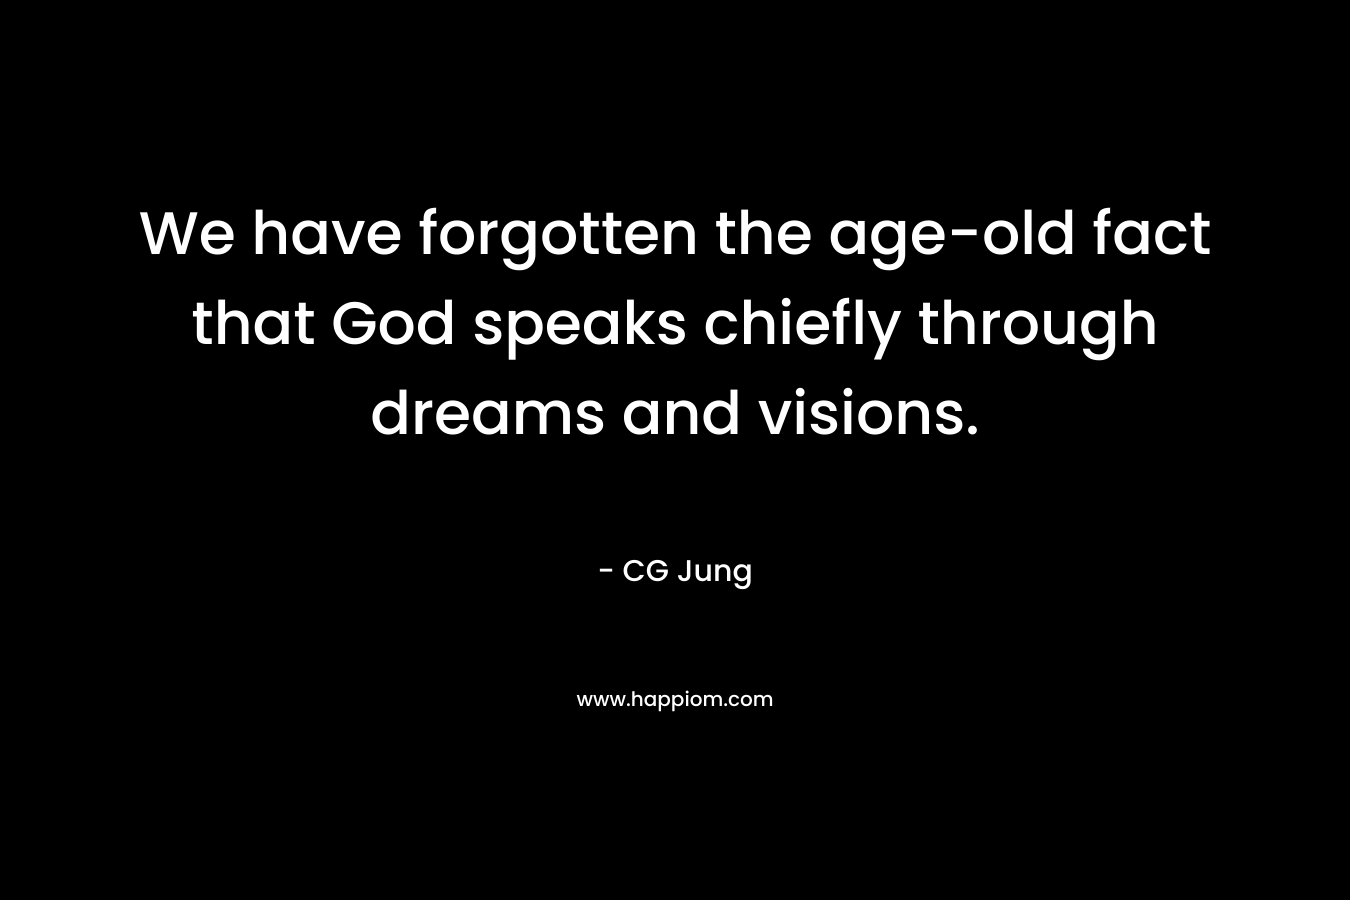 We have forgotten the age-old fact that God speaks chiefly through dreams and visions. – CG Jung